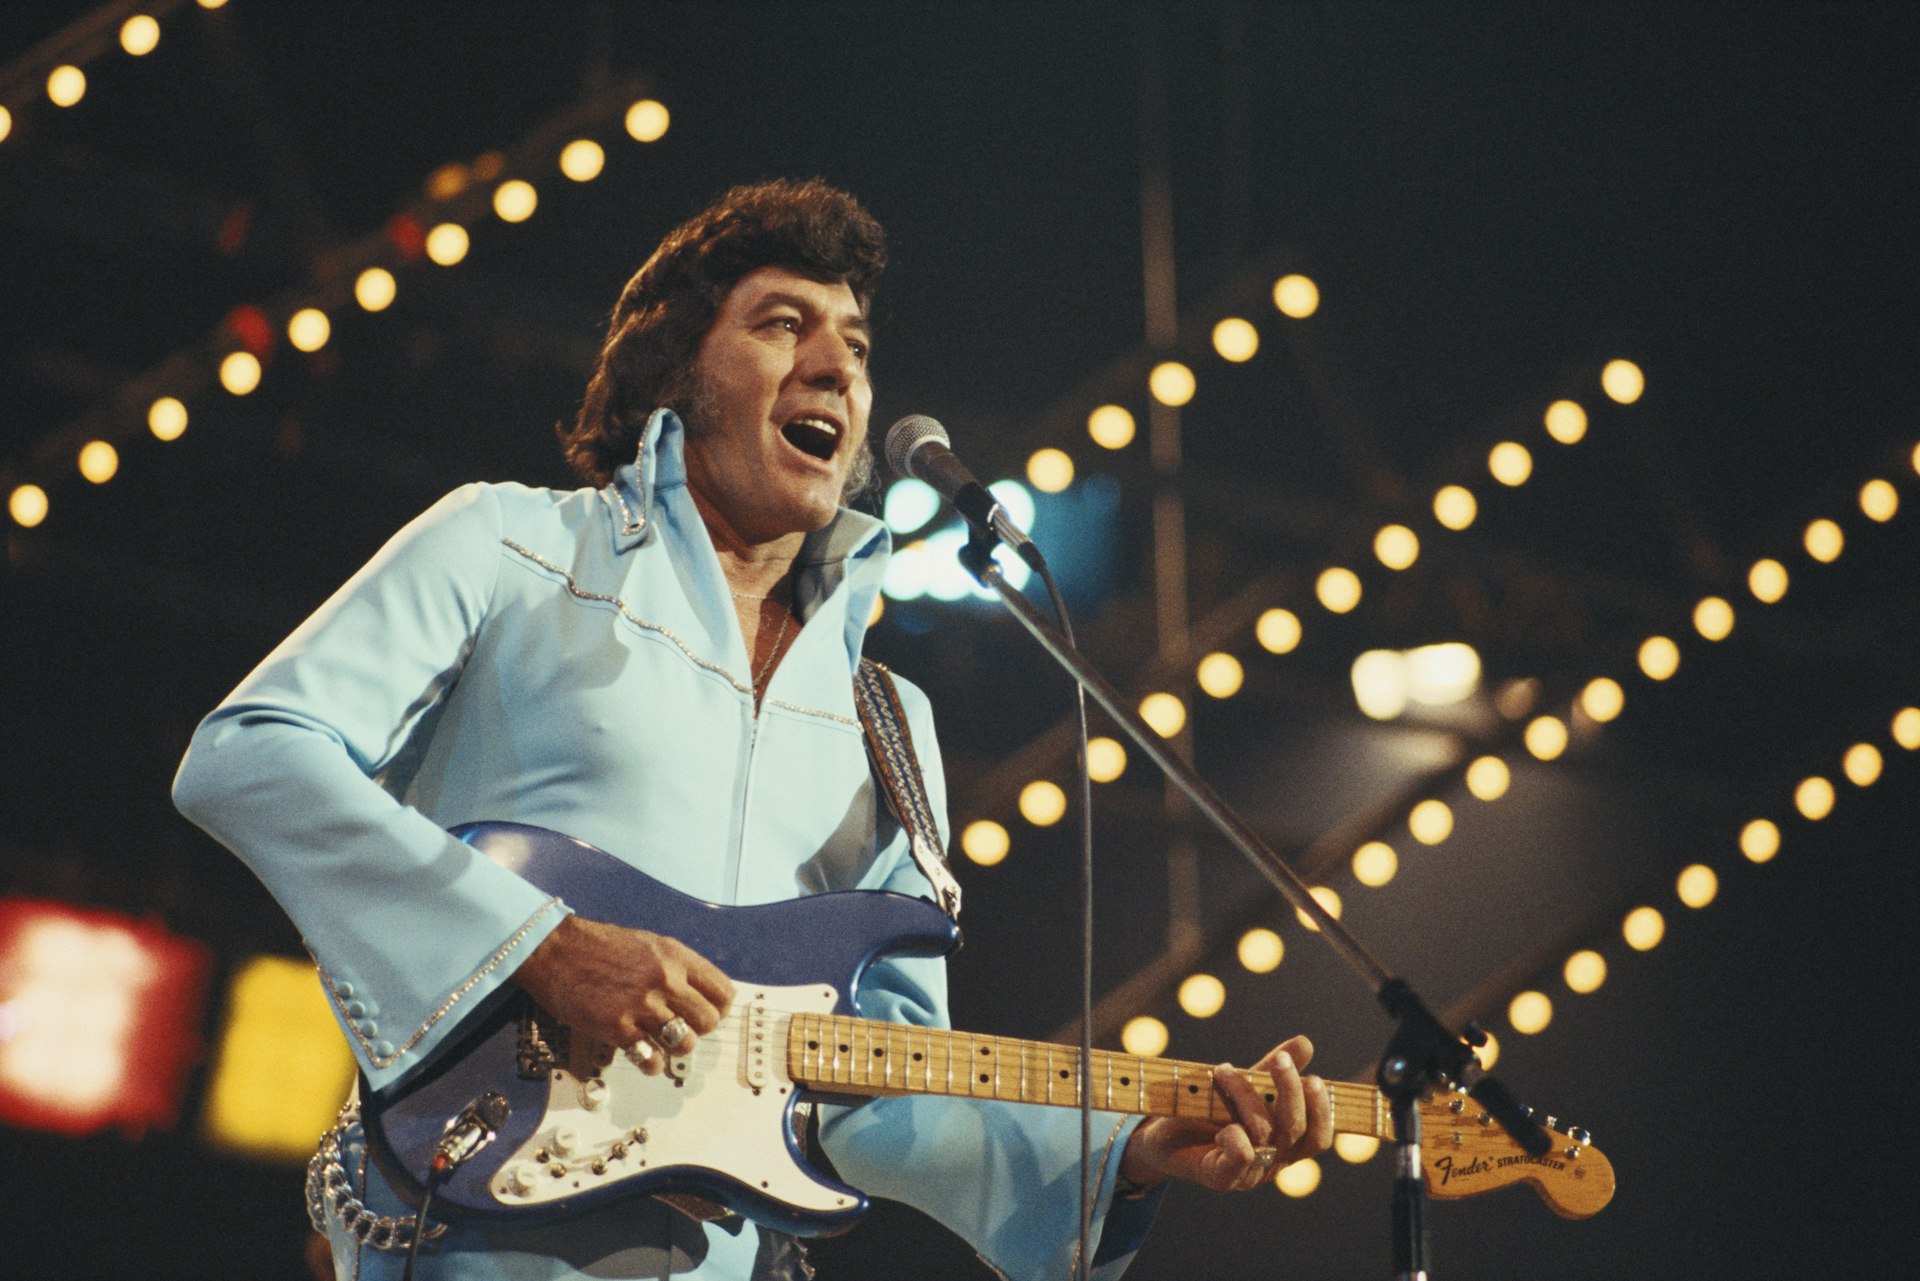 Carl Perkins U.S. rock and roll singer-songwriter and guitarist, playing the guitar during a live concert performance at the International Festival of Country Music, at Wembley Arena, London